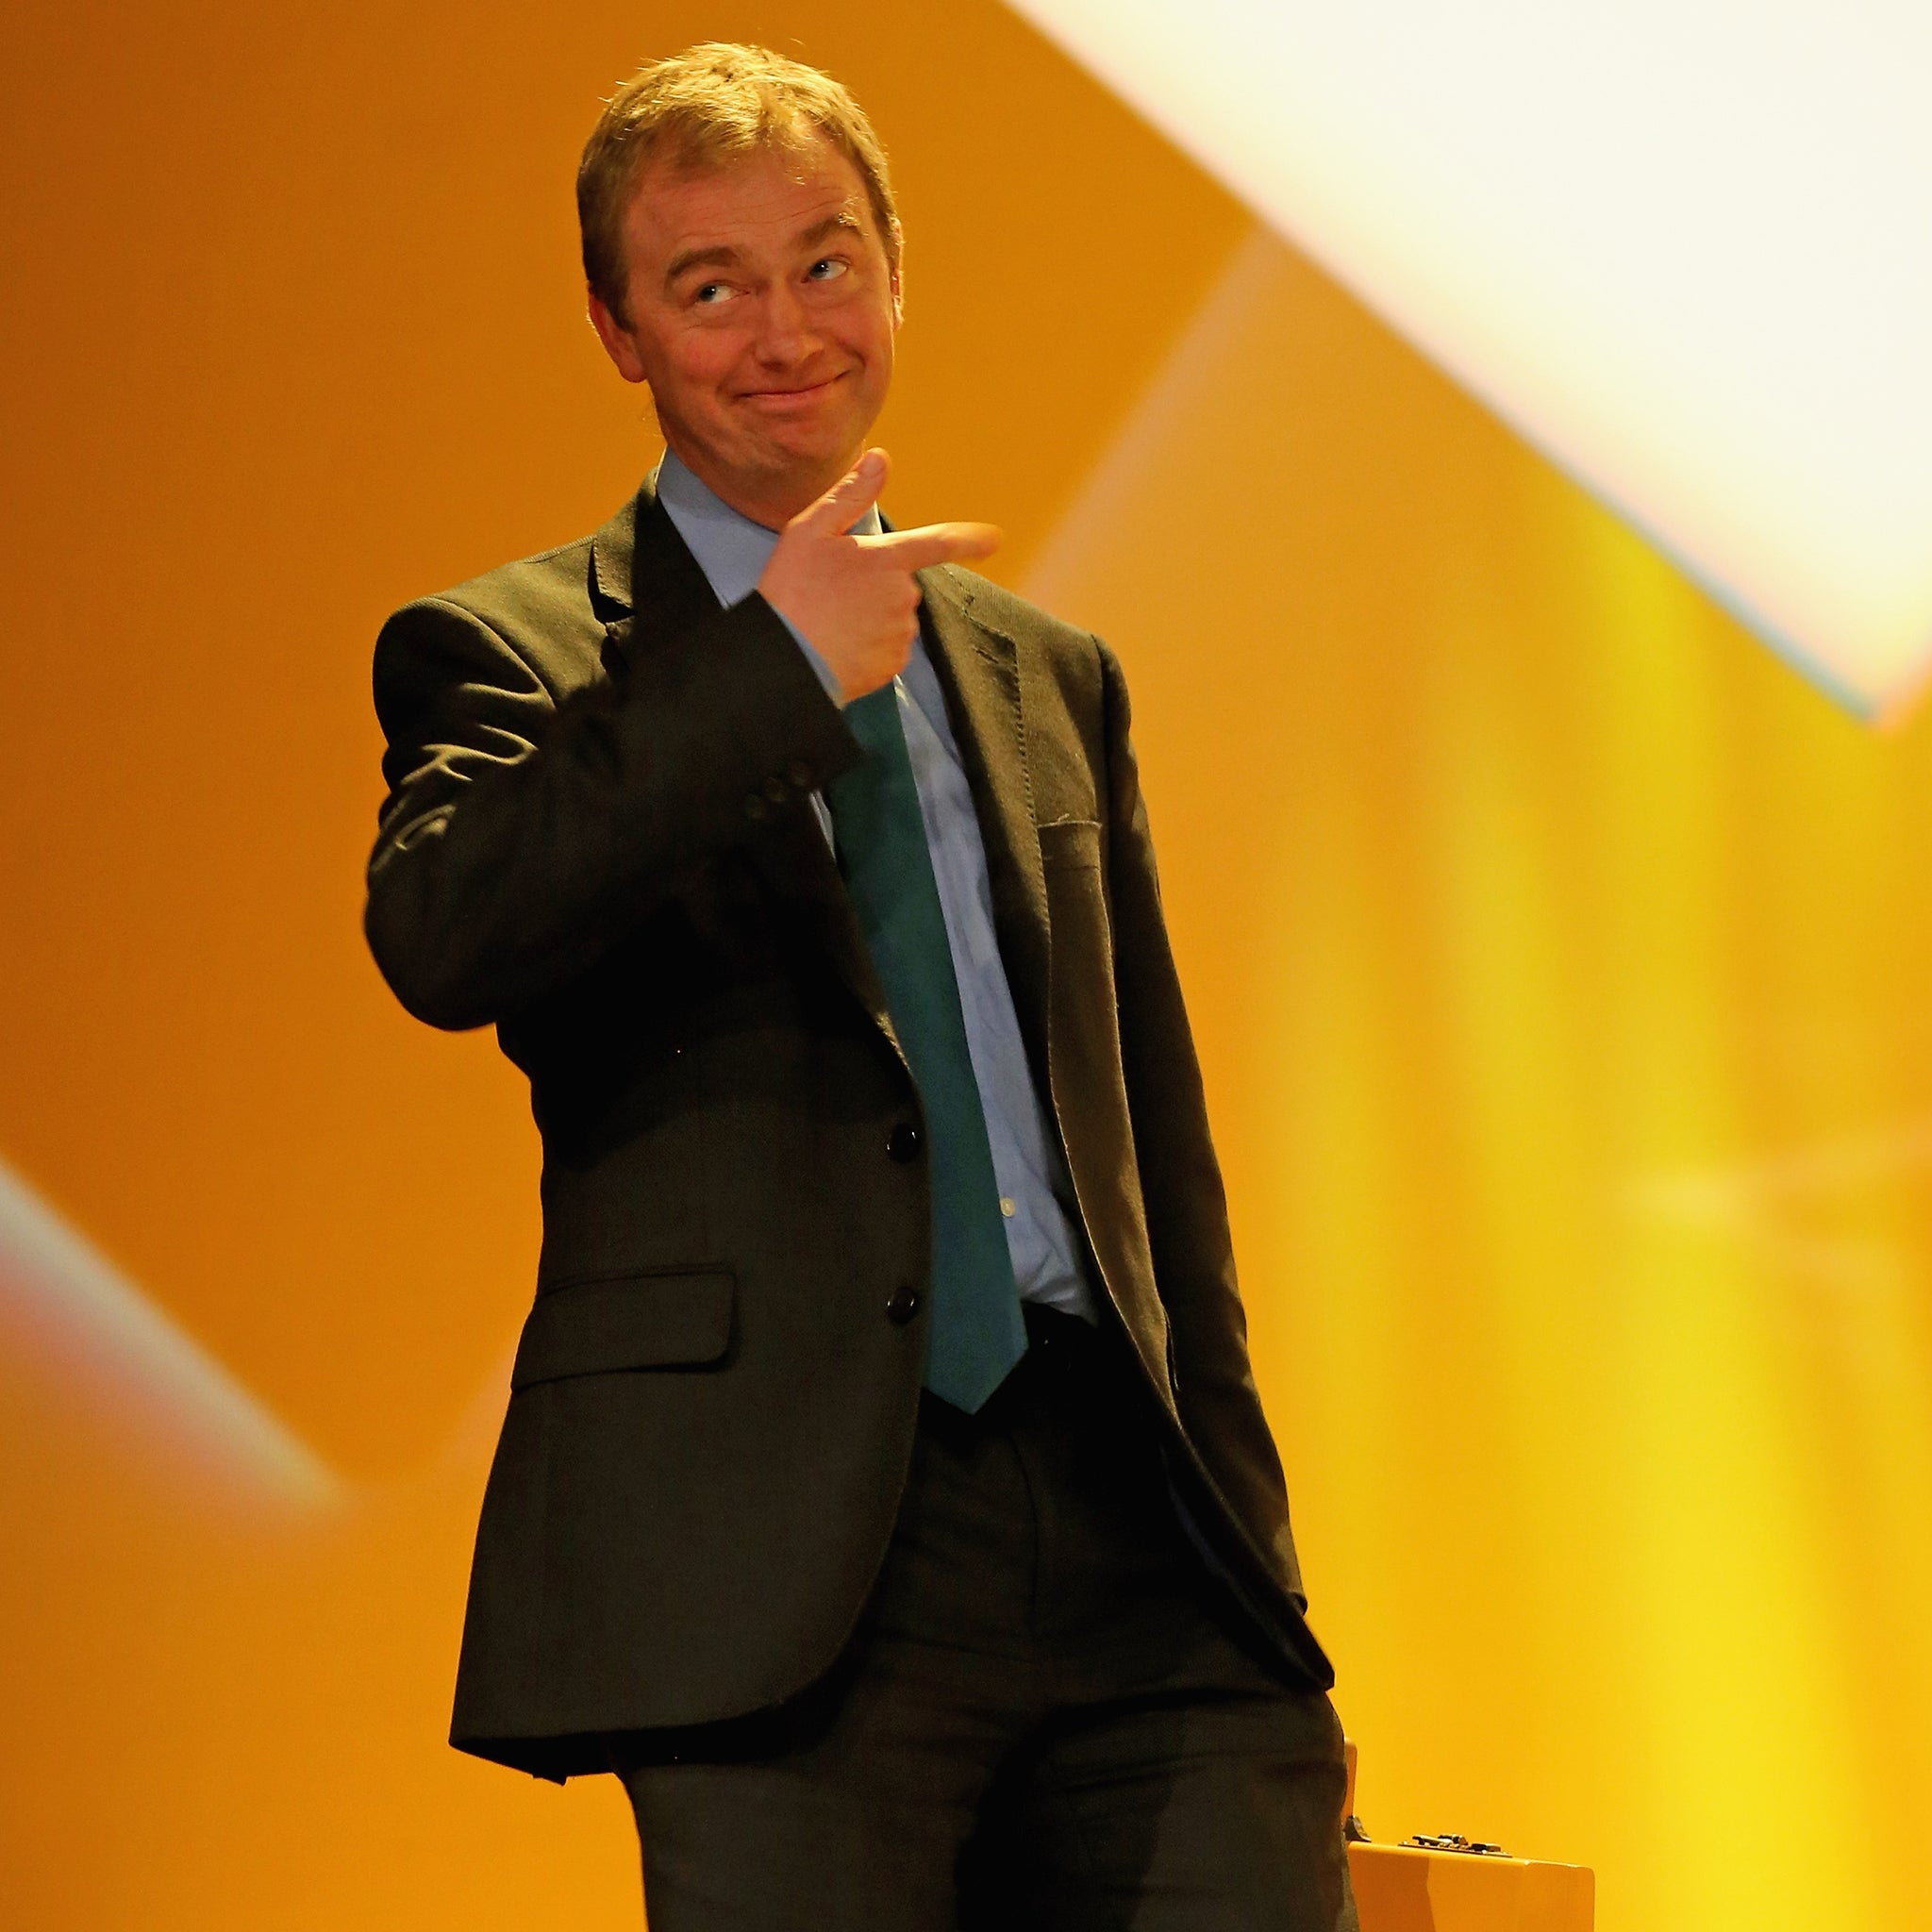 Tim Farron MP carries the Lib DEm 'budget box' on to the stage during the party's spring conference at the ACC on March 15, 2015 in Liverpool, England.